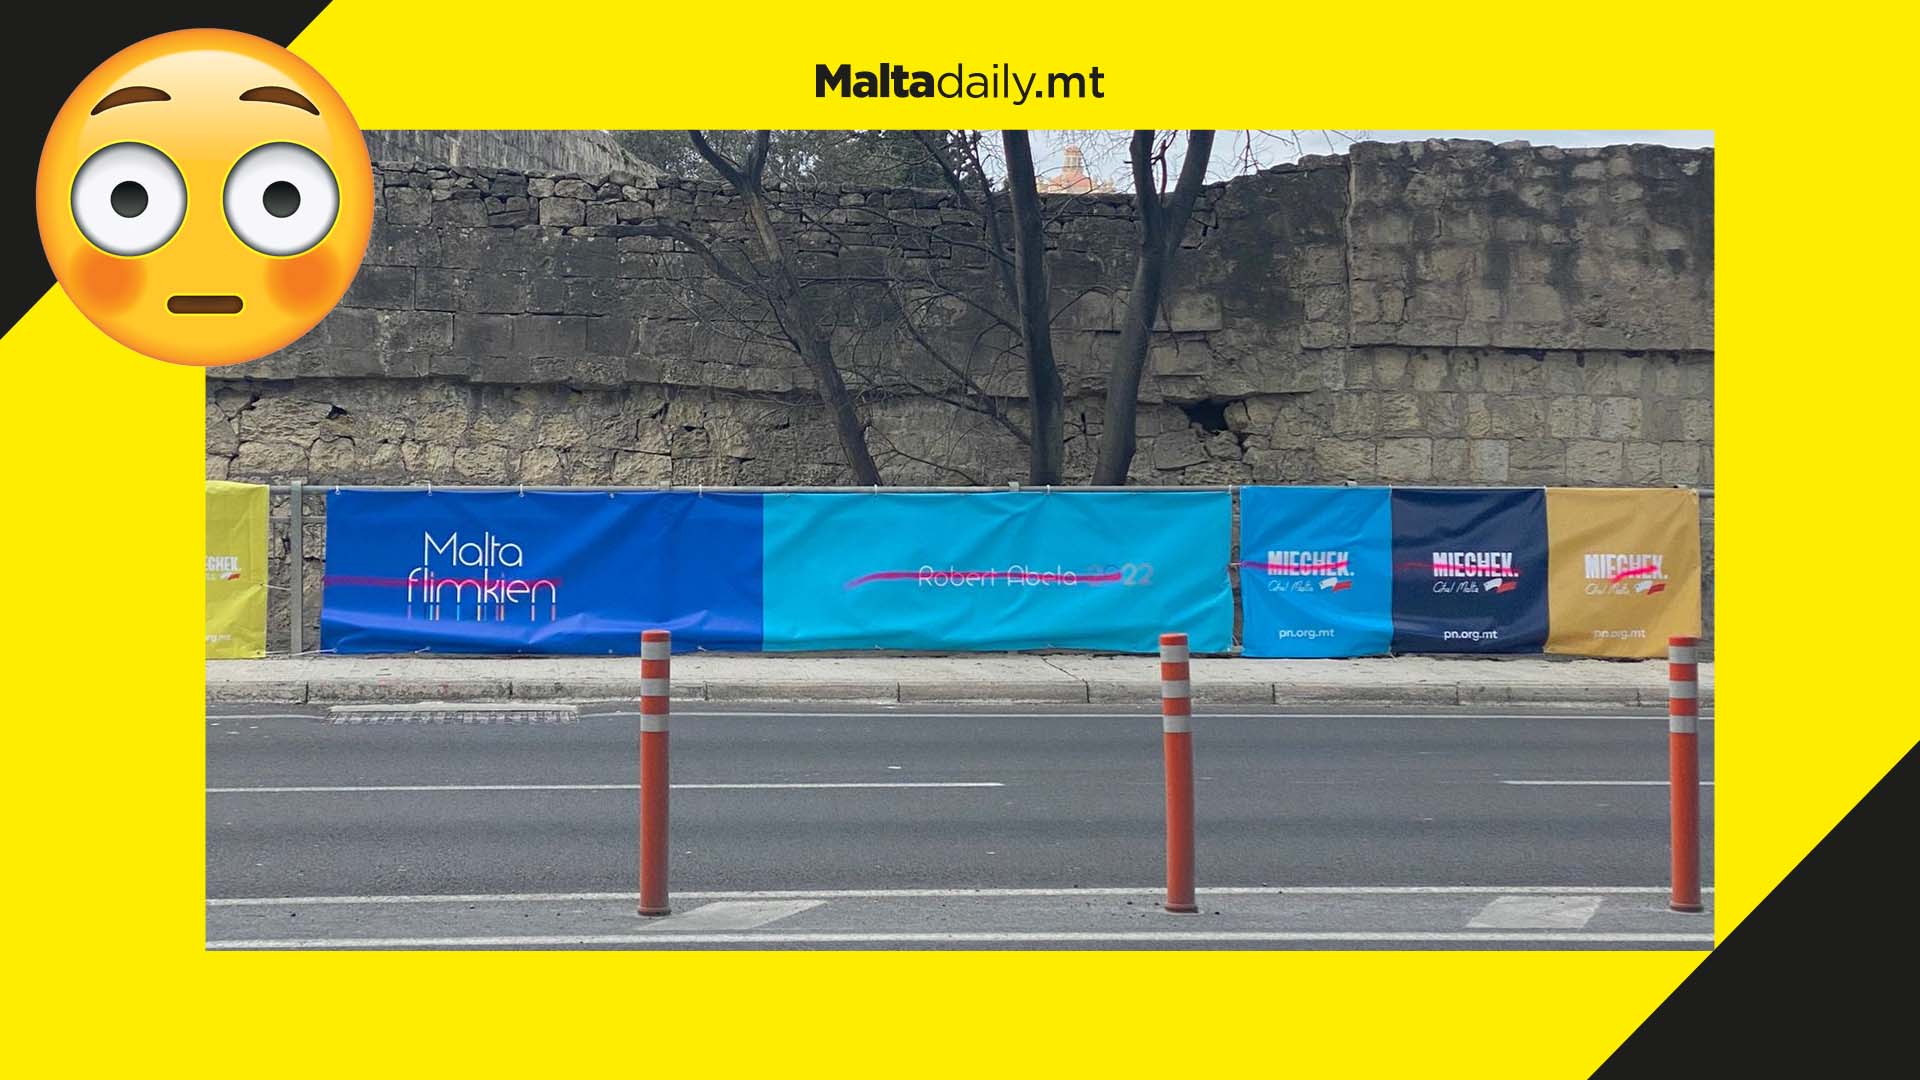 Vandalism on election banners of both parties spotted